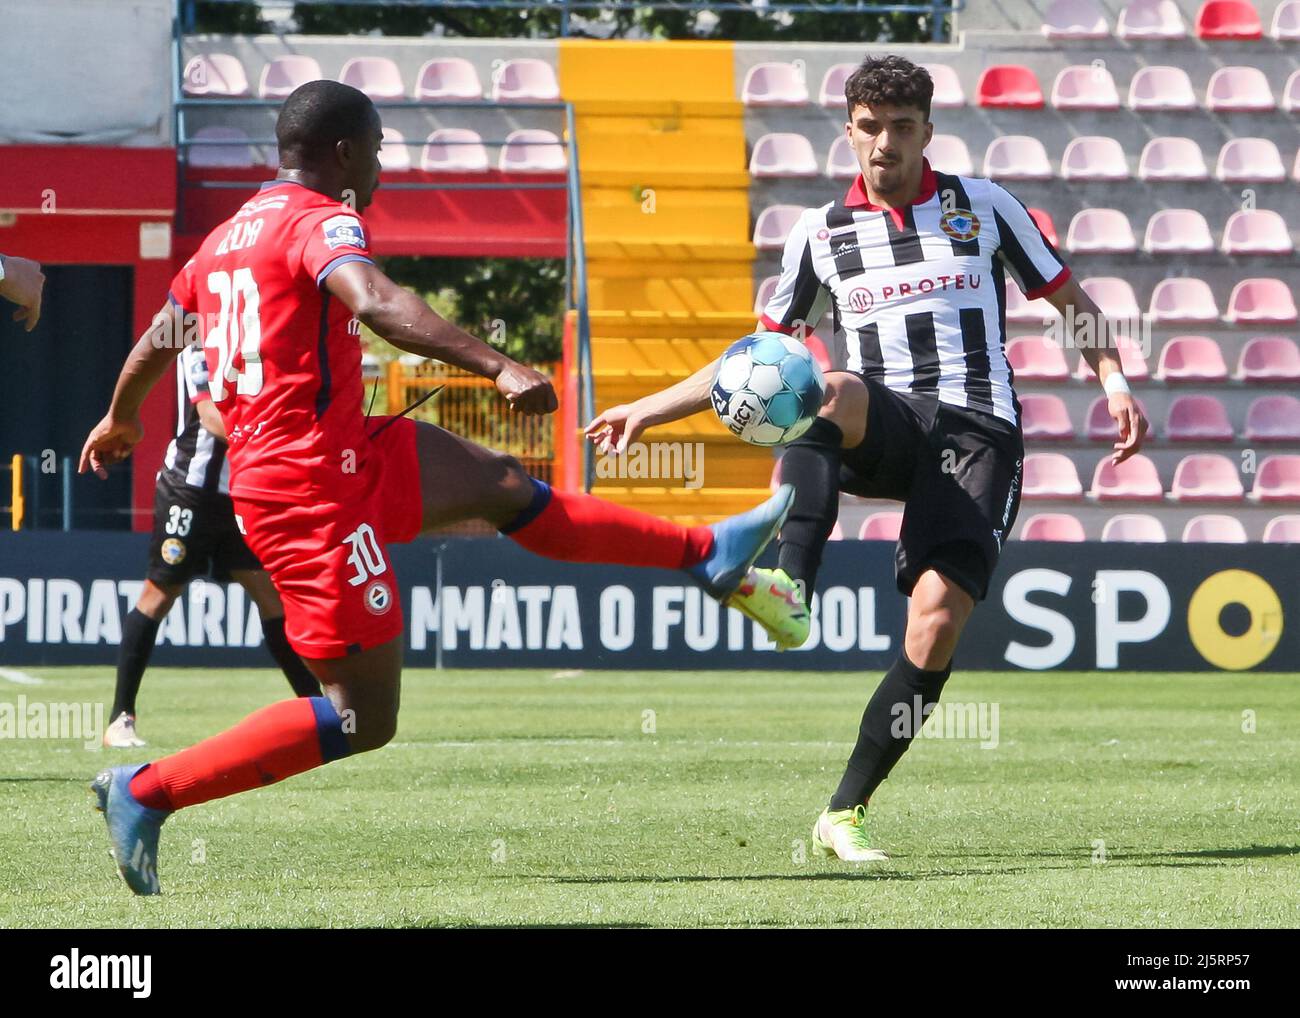 Trofa, 04/25/2022 - Clube Desportivo Trofense hosted Varzim Sport Club this  afternoon, at EstÃdio Clube Desportivo Trofense, in a game counting for the  31st round of the 2021/2022 II League. Djalma Campos;